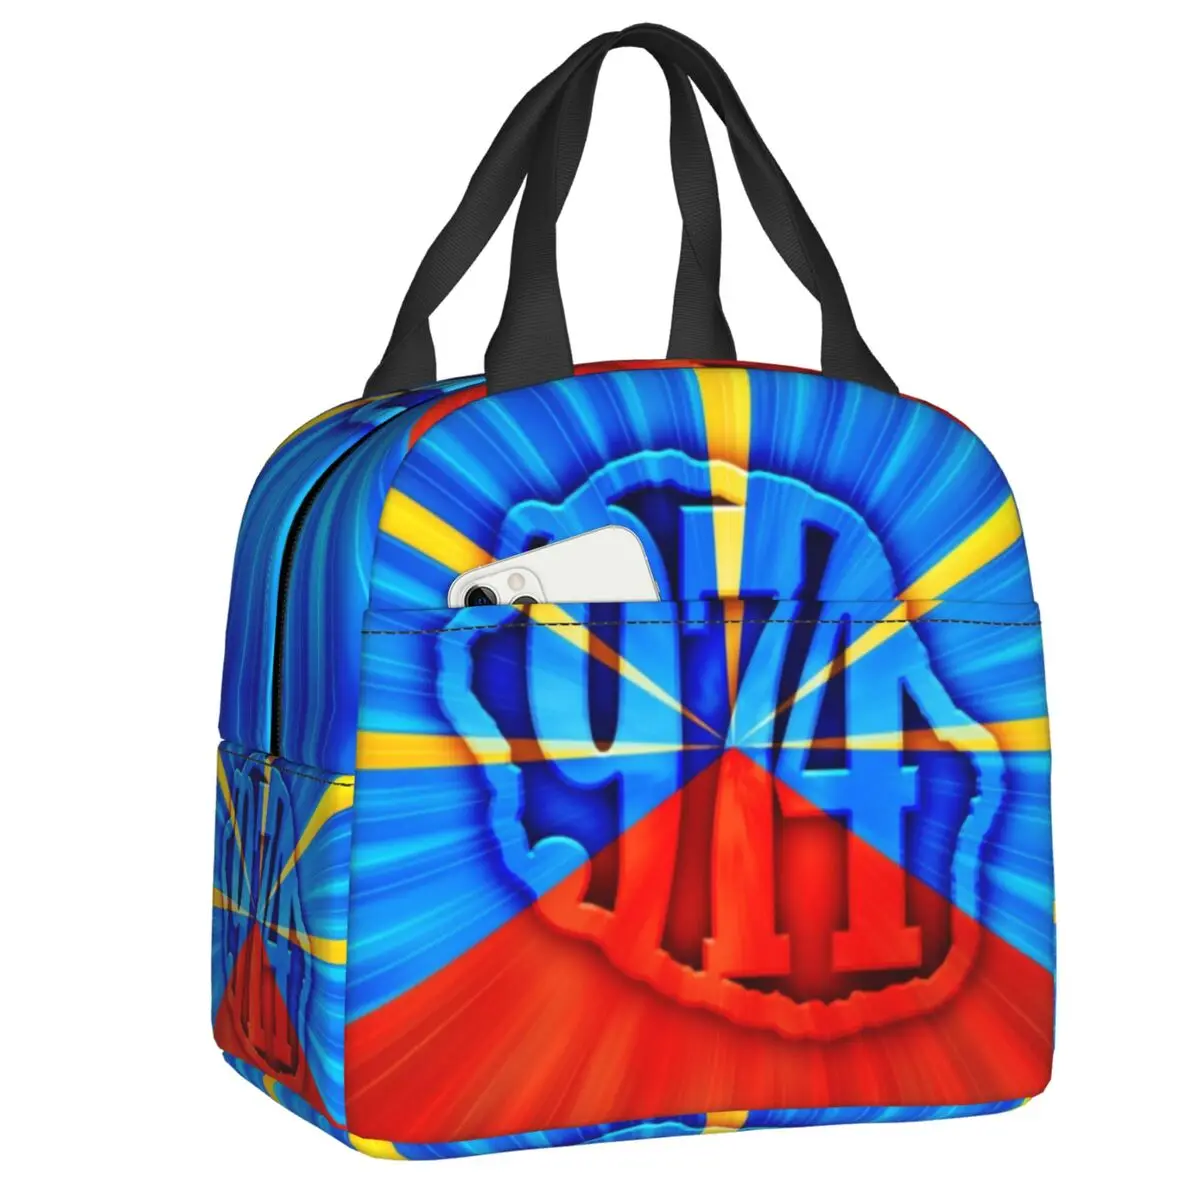 

974 Maveli Reunion Island Flag Thermal Insulated Lunch Bag Women Portable Lunch Box for Work School Travel Picnic Food Tote Bag